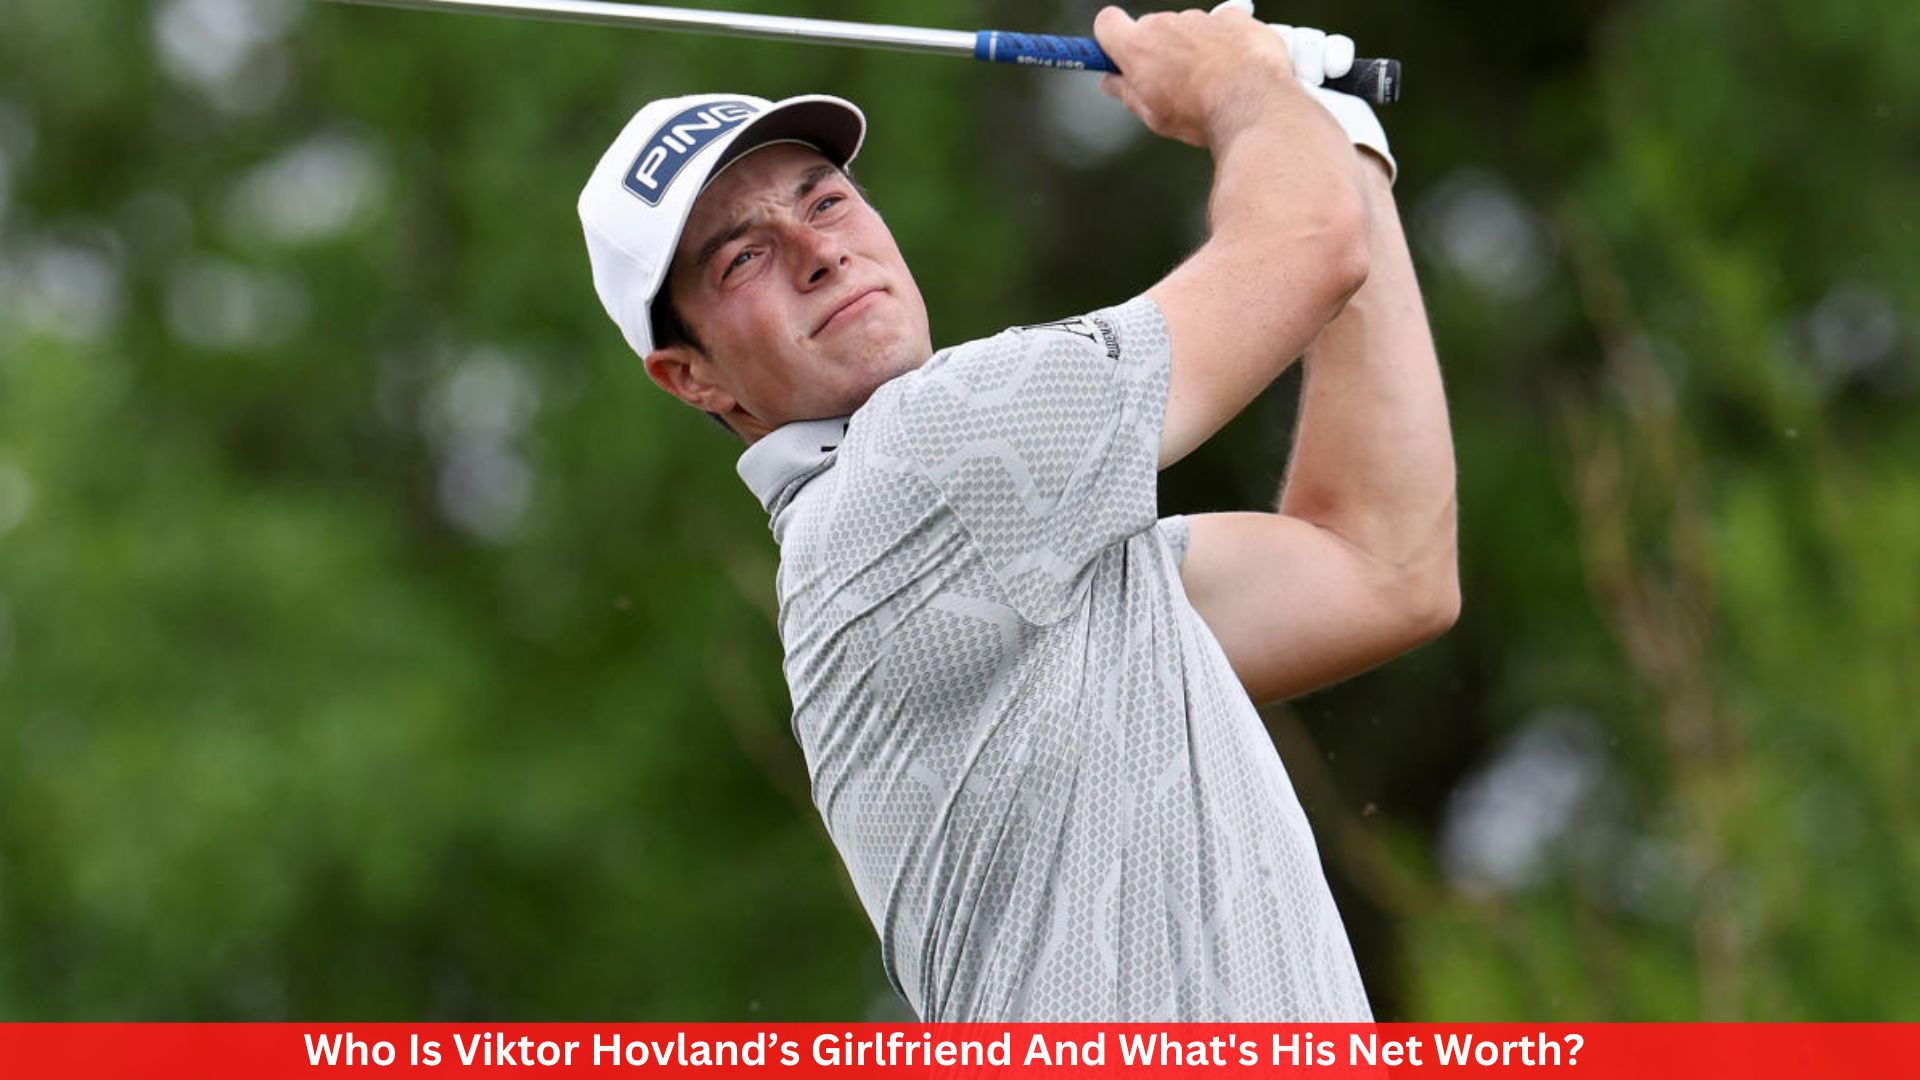 Who Is Viktor Hovland’s Girlfriend And What's His Net Worth?